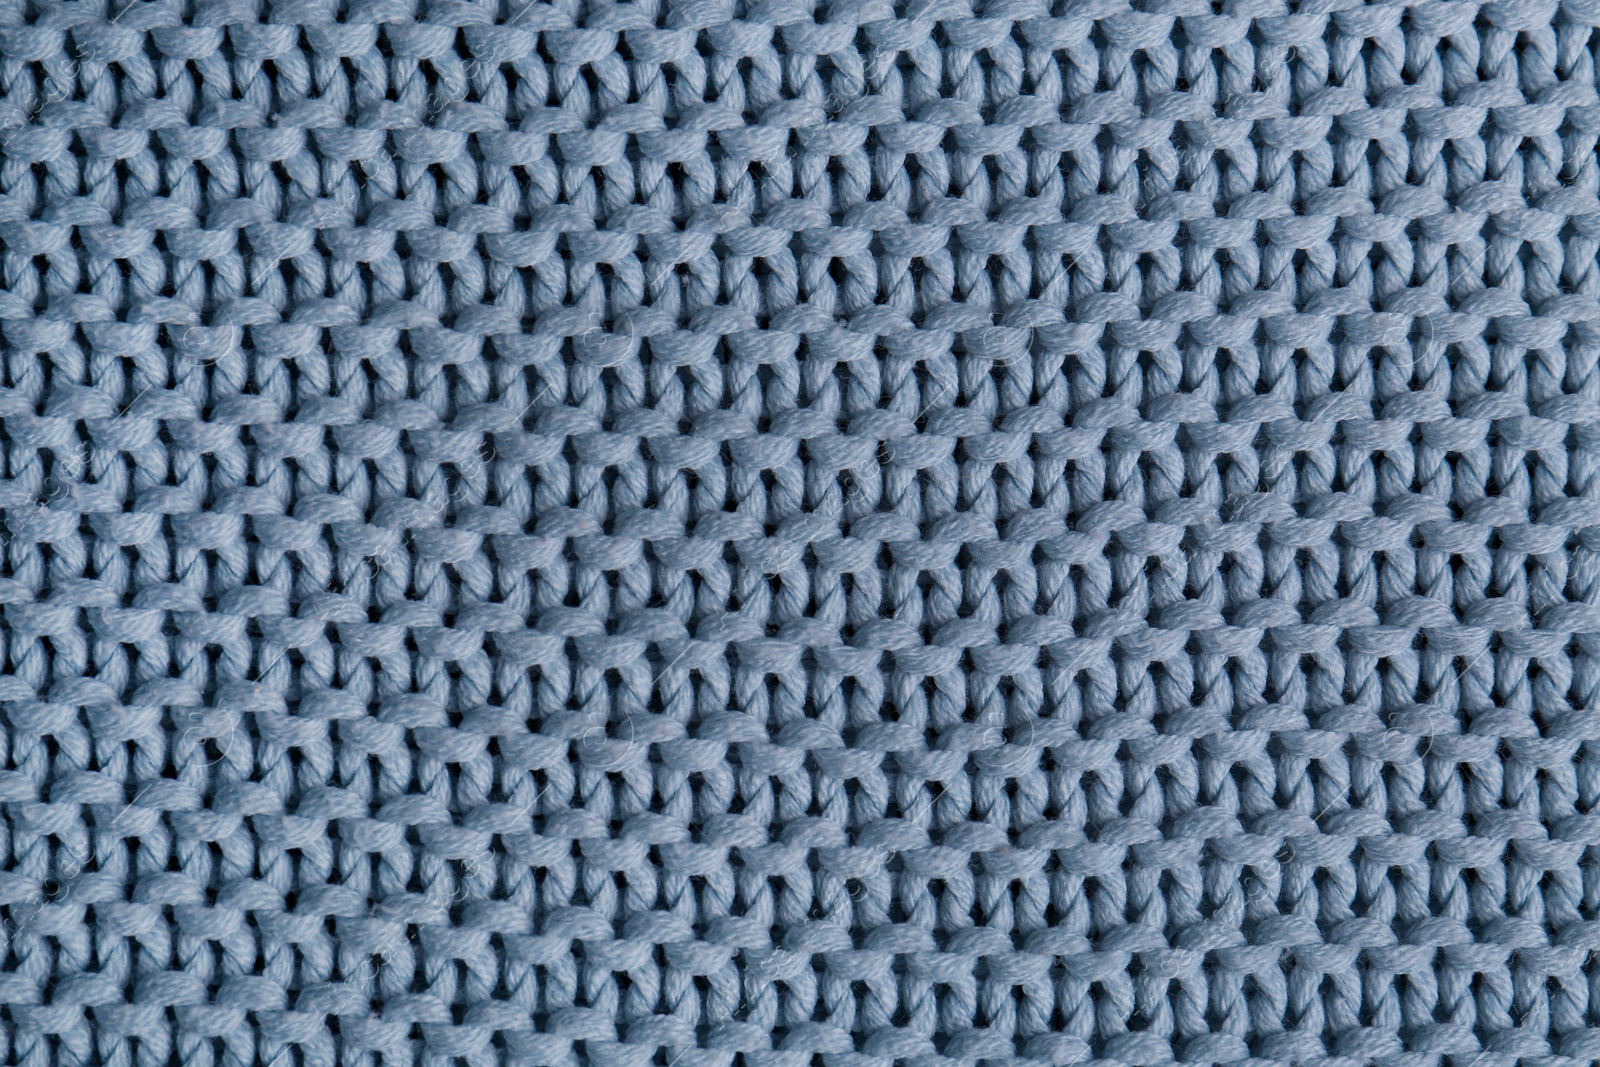 Photo of Beautiful light blue knitted fabric as background, top view